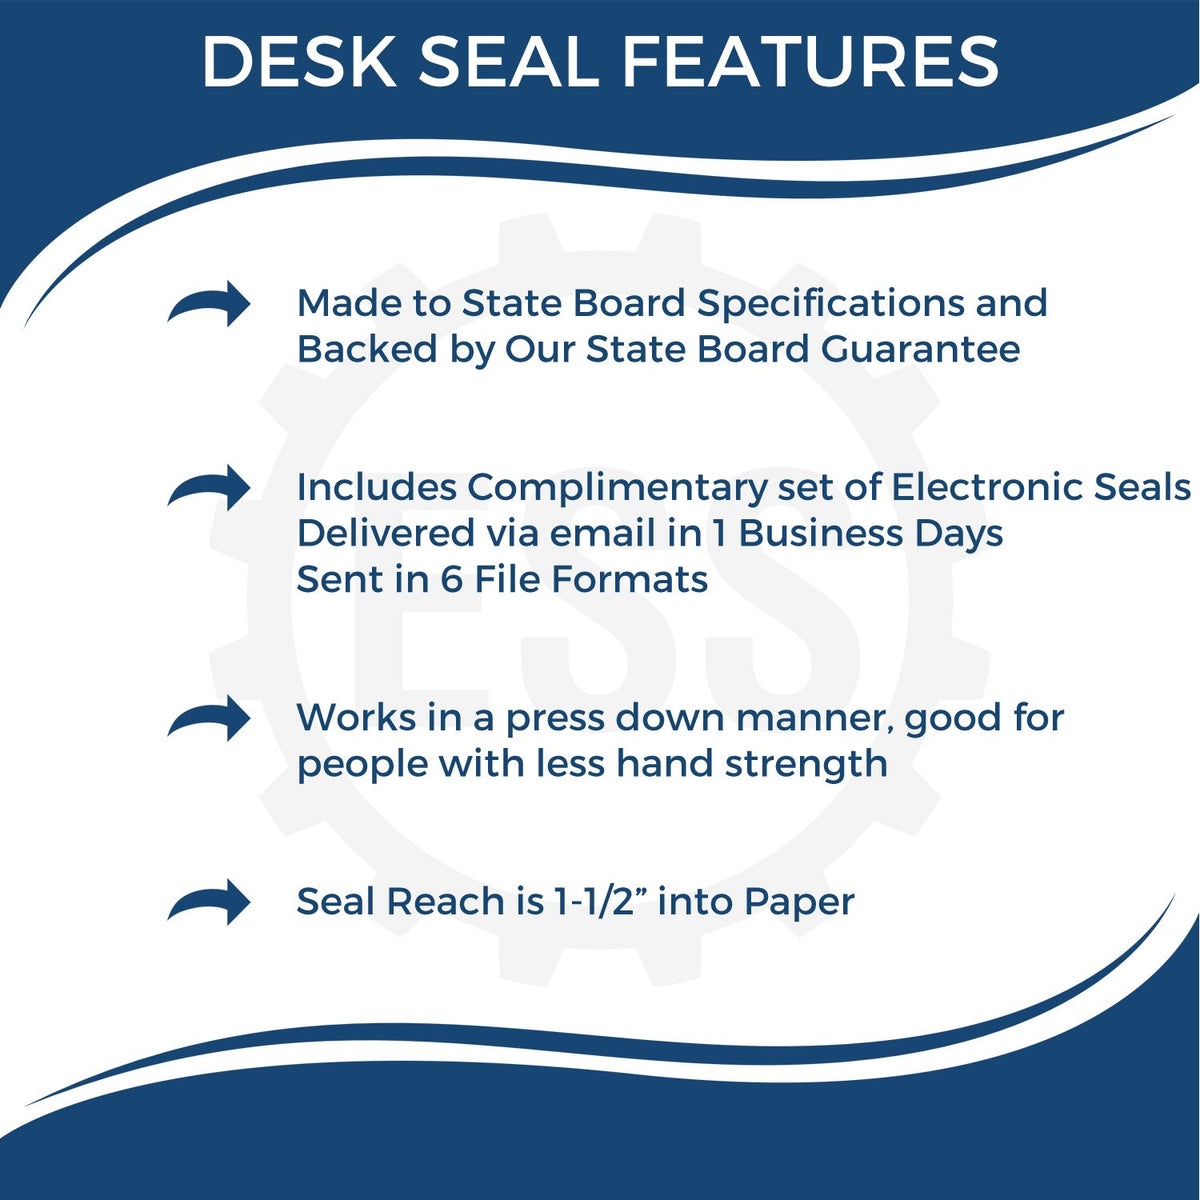 A picture of an infographic highlighting the selling points for the Connecticut Desk Architect Embossing Seal